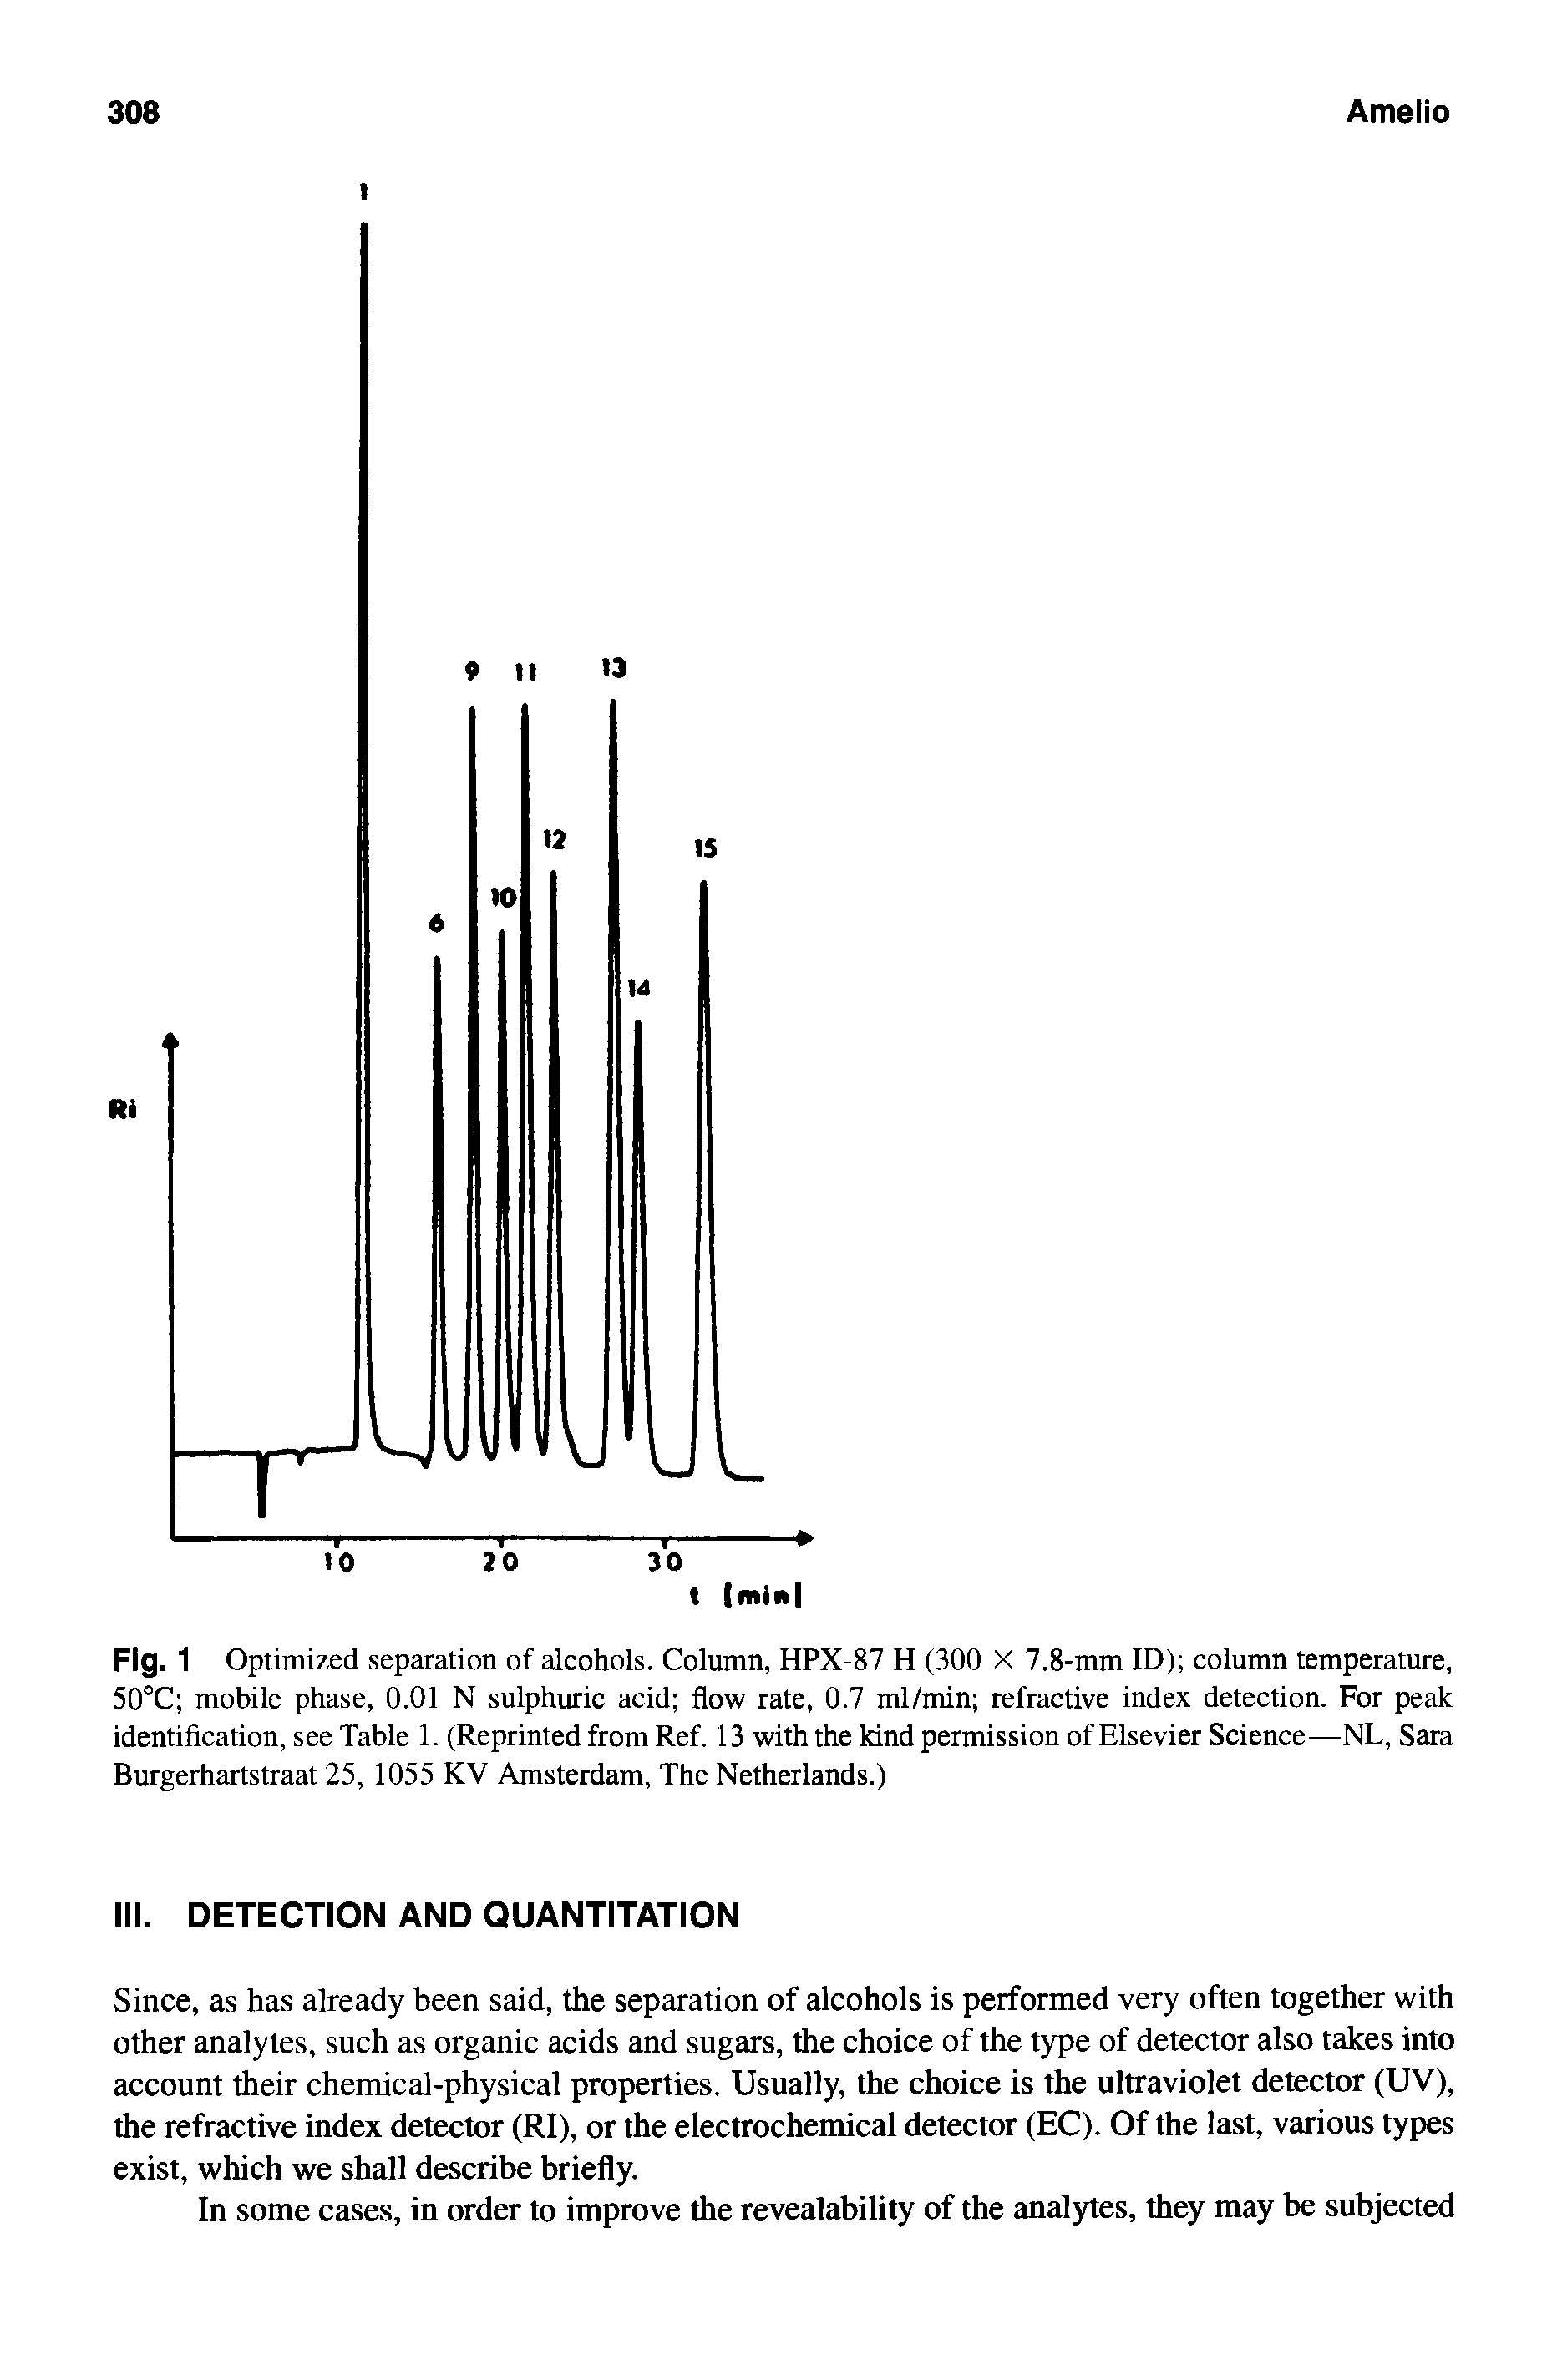 Fig. 1 Optimized separation of alcohols. Column, HPX-87 H (300 X 7.8-mm ID) column temperature, 50°C mobile phase, 0.01 N sulphuric acid flow rate, 0.7 ml/min refractive index detection. For peak identification, see Table 1. (Reprinted from Ref. 13 with the kind permission of Elsevier Science—NL, Sara Burgerhartstraat 25, 1055 KV Amsterdam, The Netherlands.)...